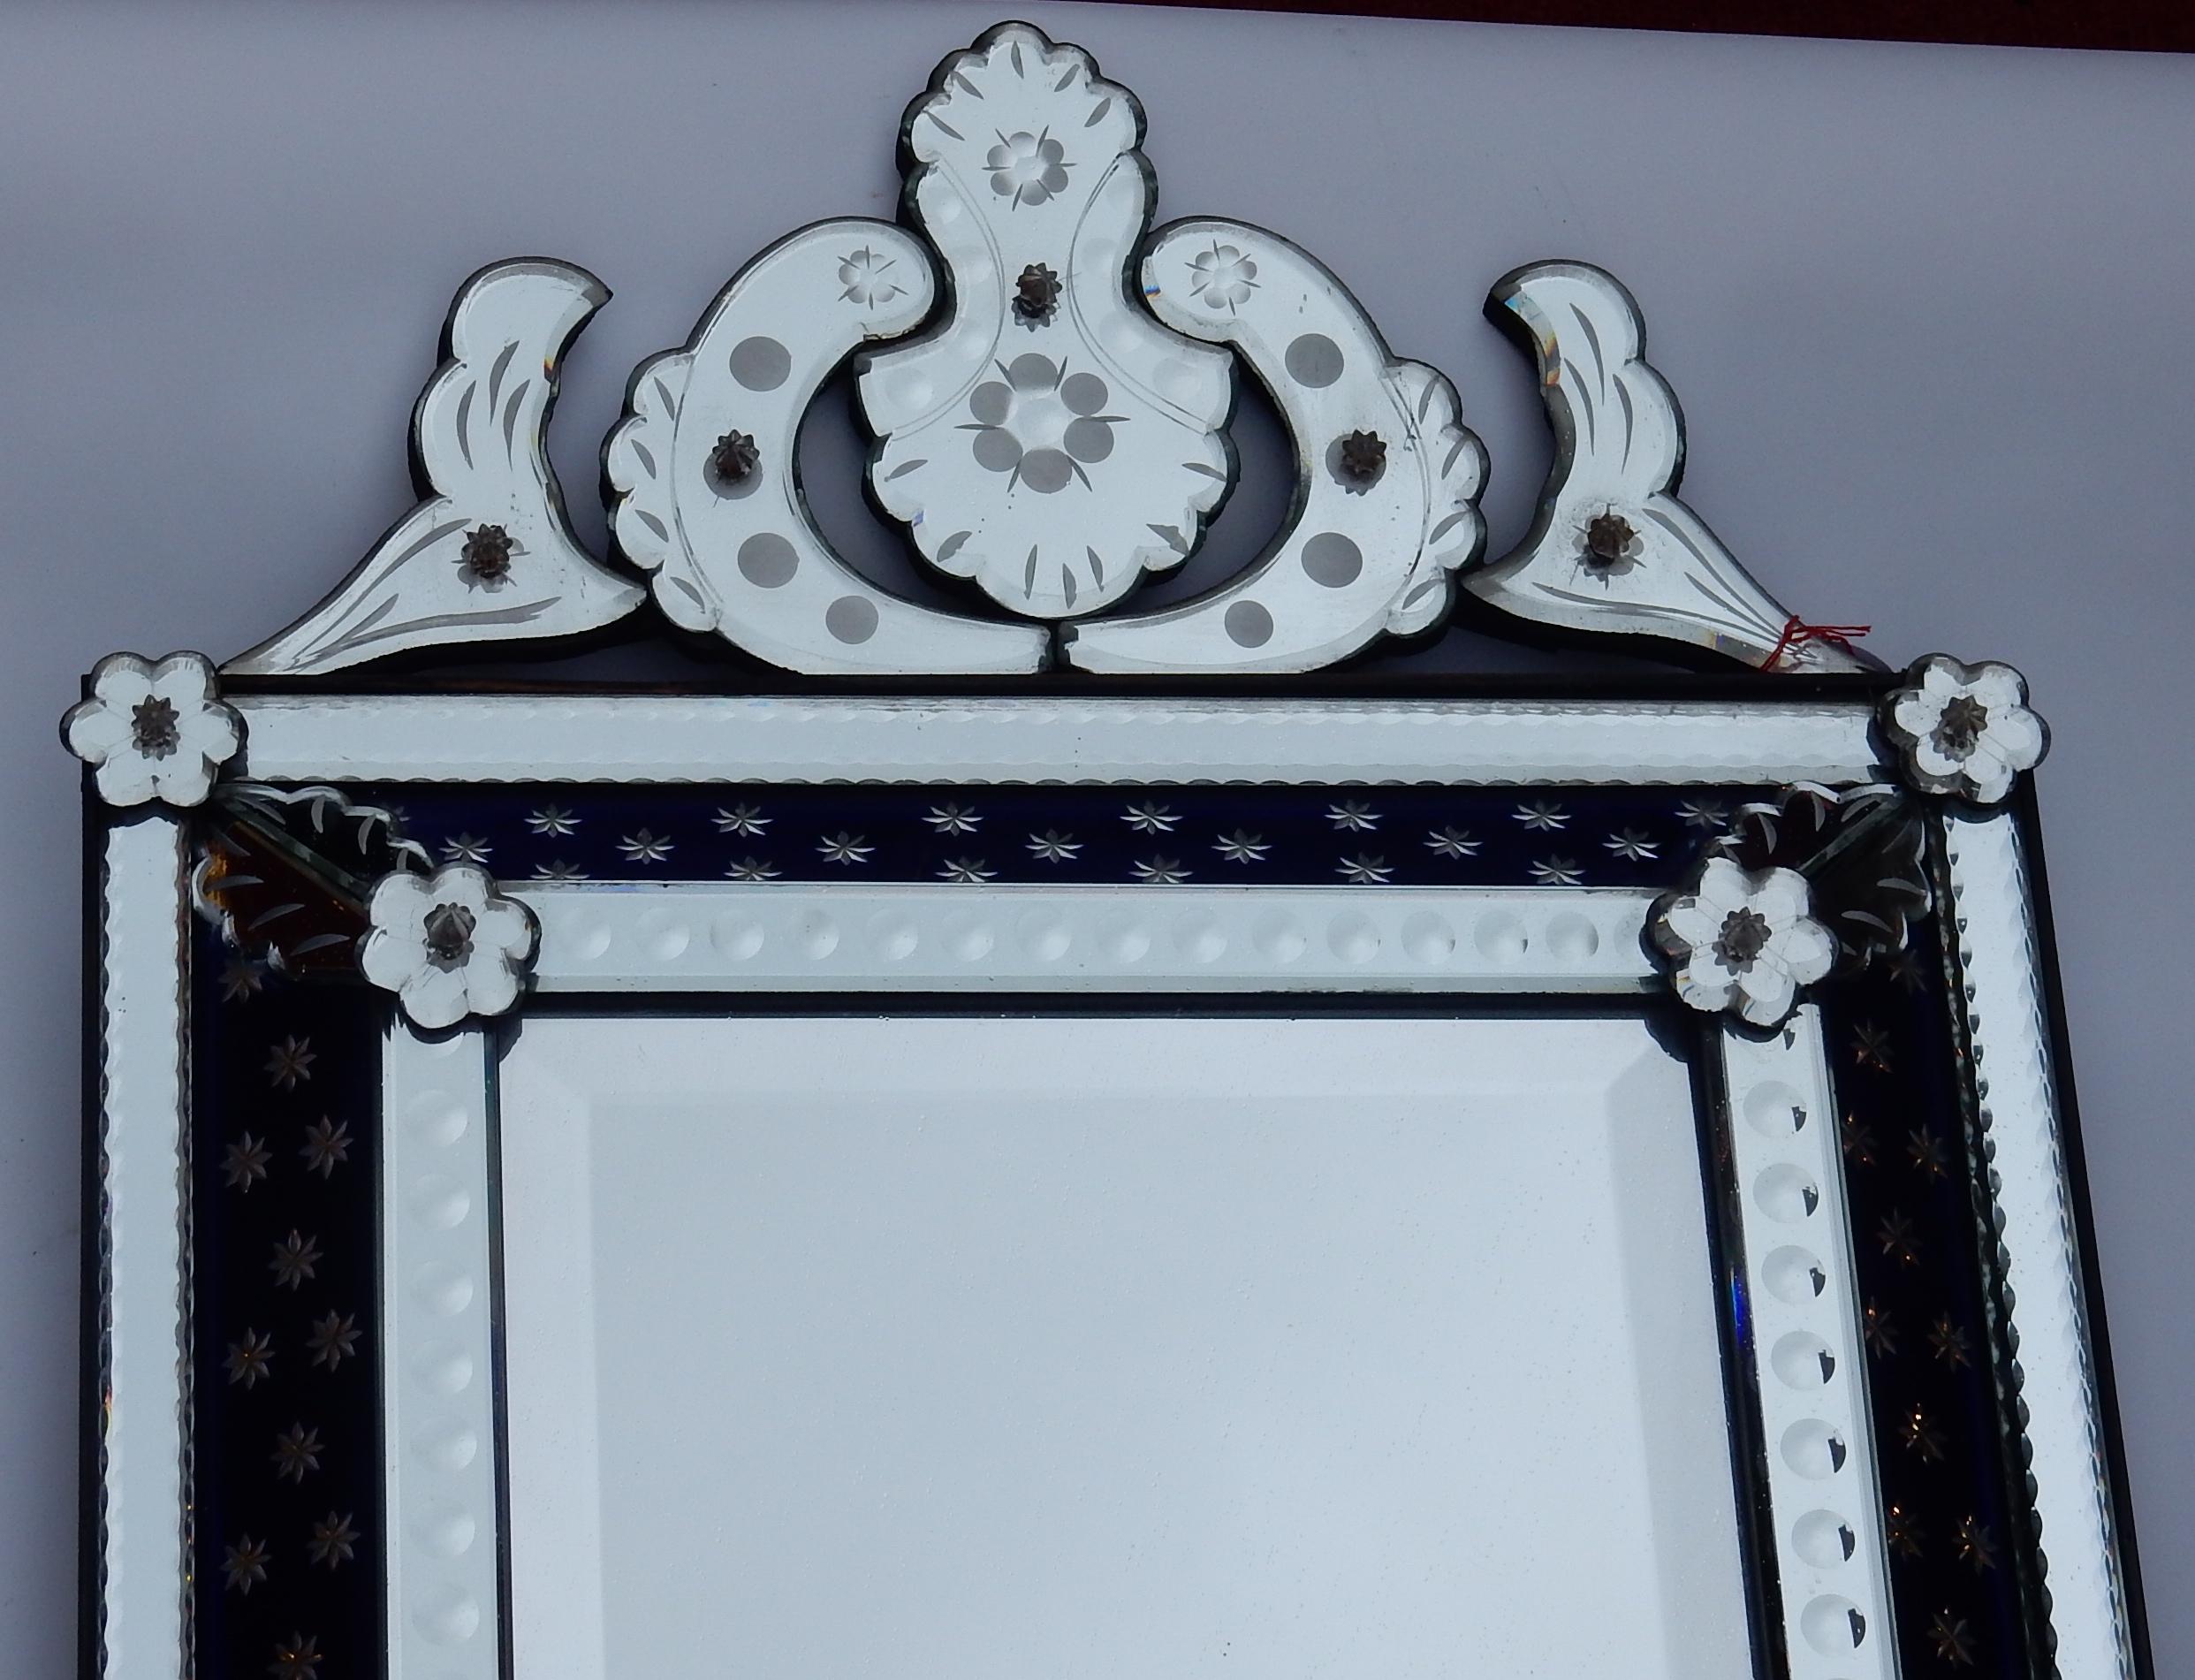 Silvered 1940-1950 Venetian Mirror N3 with Pediment, Blue Glass Adorned with Stars